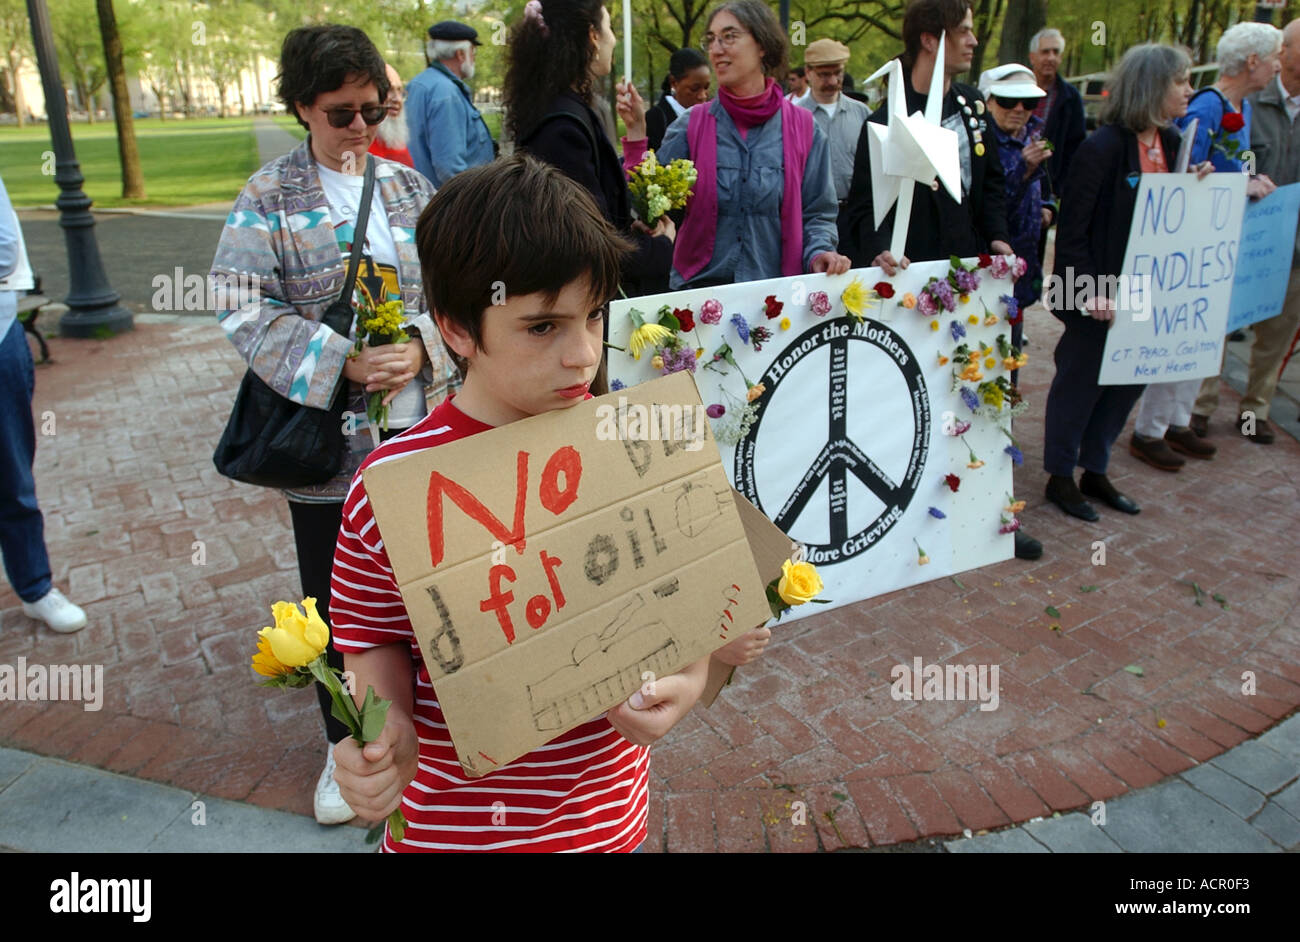 A young War protester protests the Iraq War in the United States Stock Photo